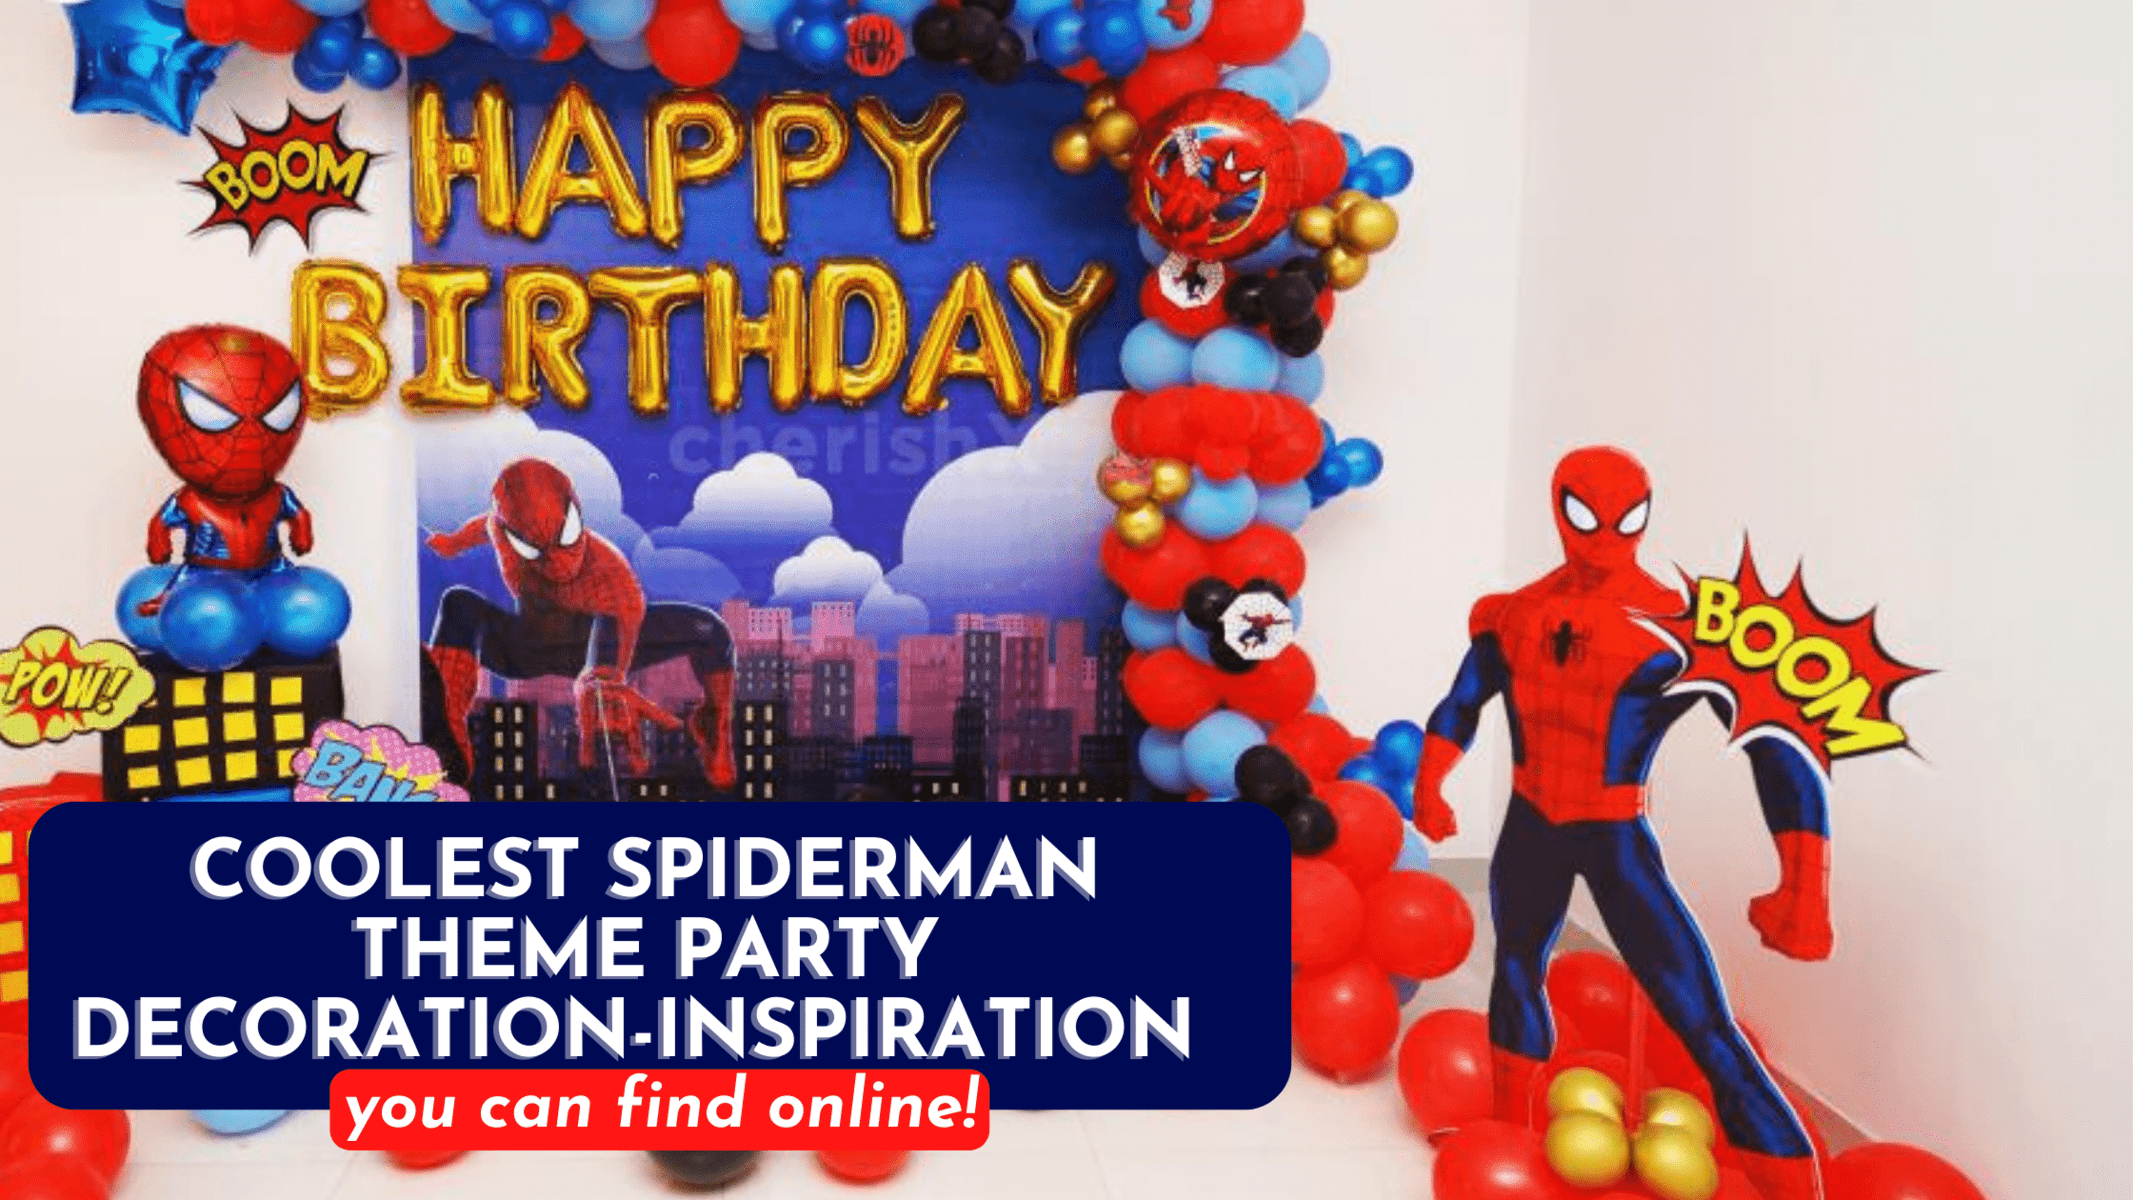 Coolest Spiderman Theme Party Decoration-Inspiration you can find online!